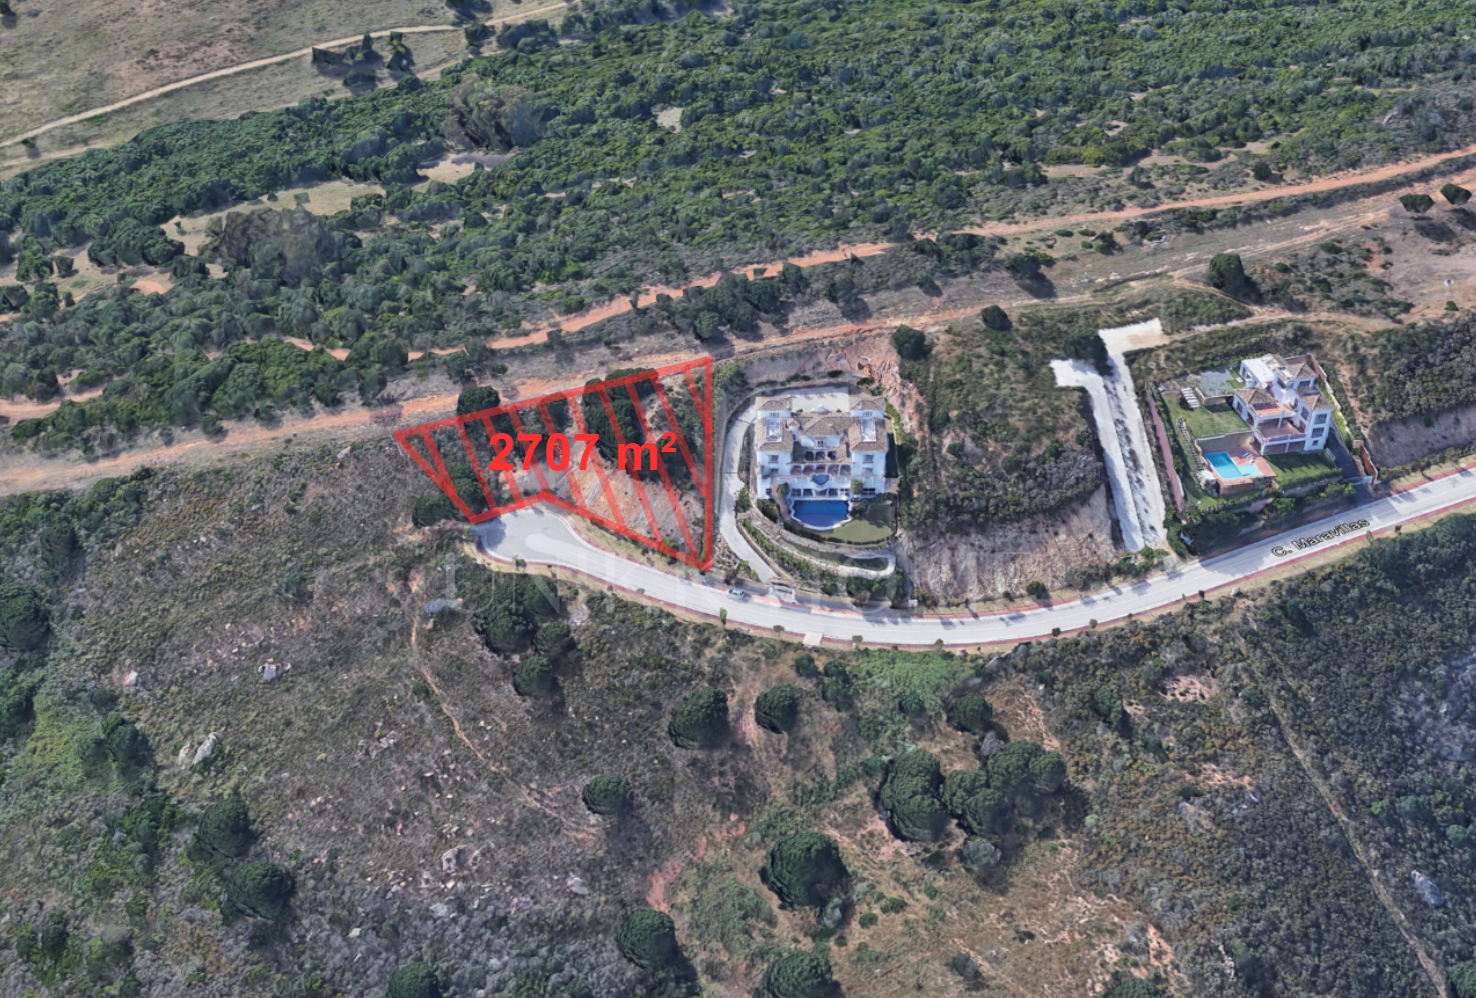 Plot with Spectacular Sea Views in Sotogrande